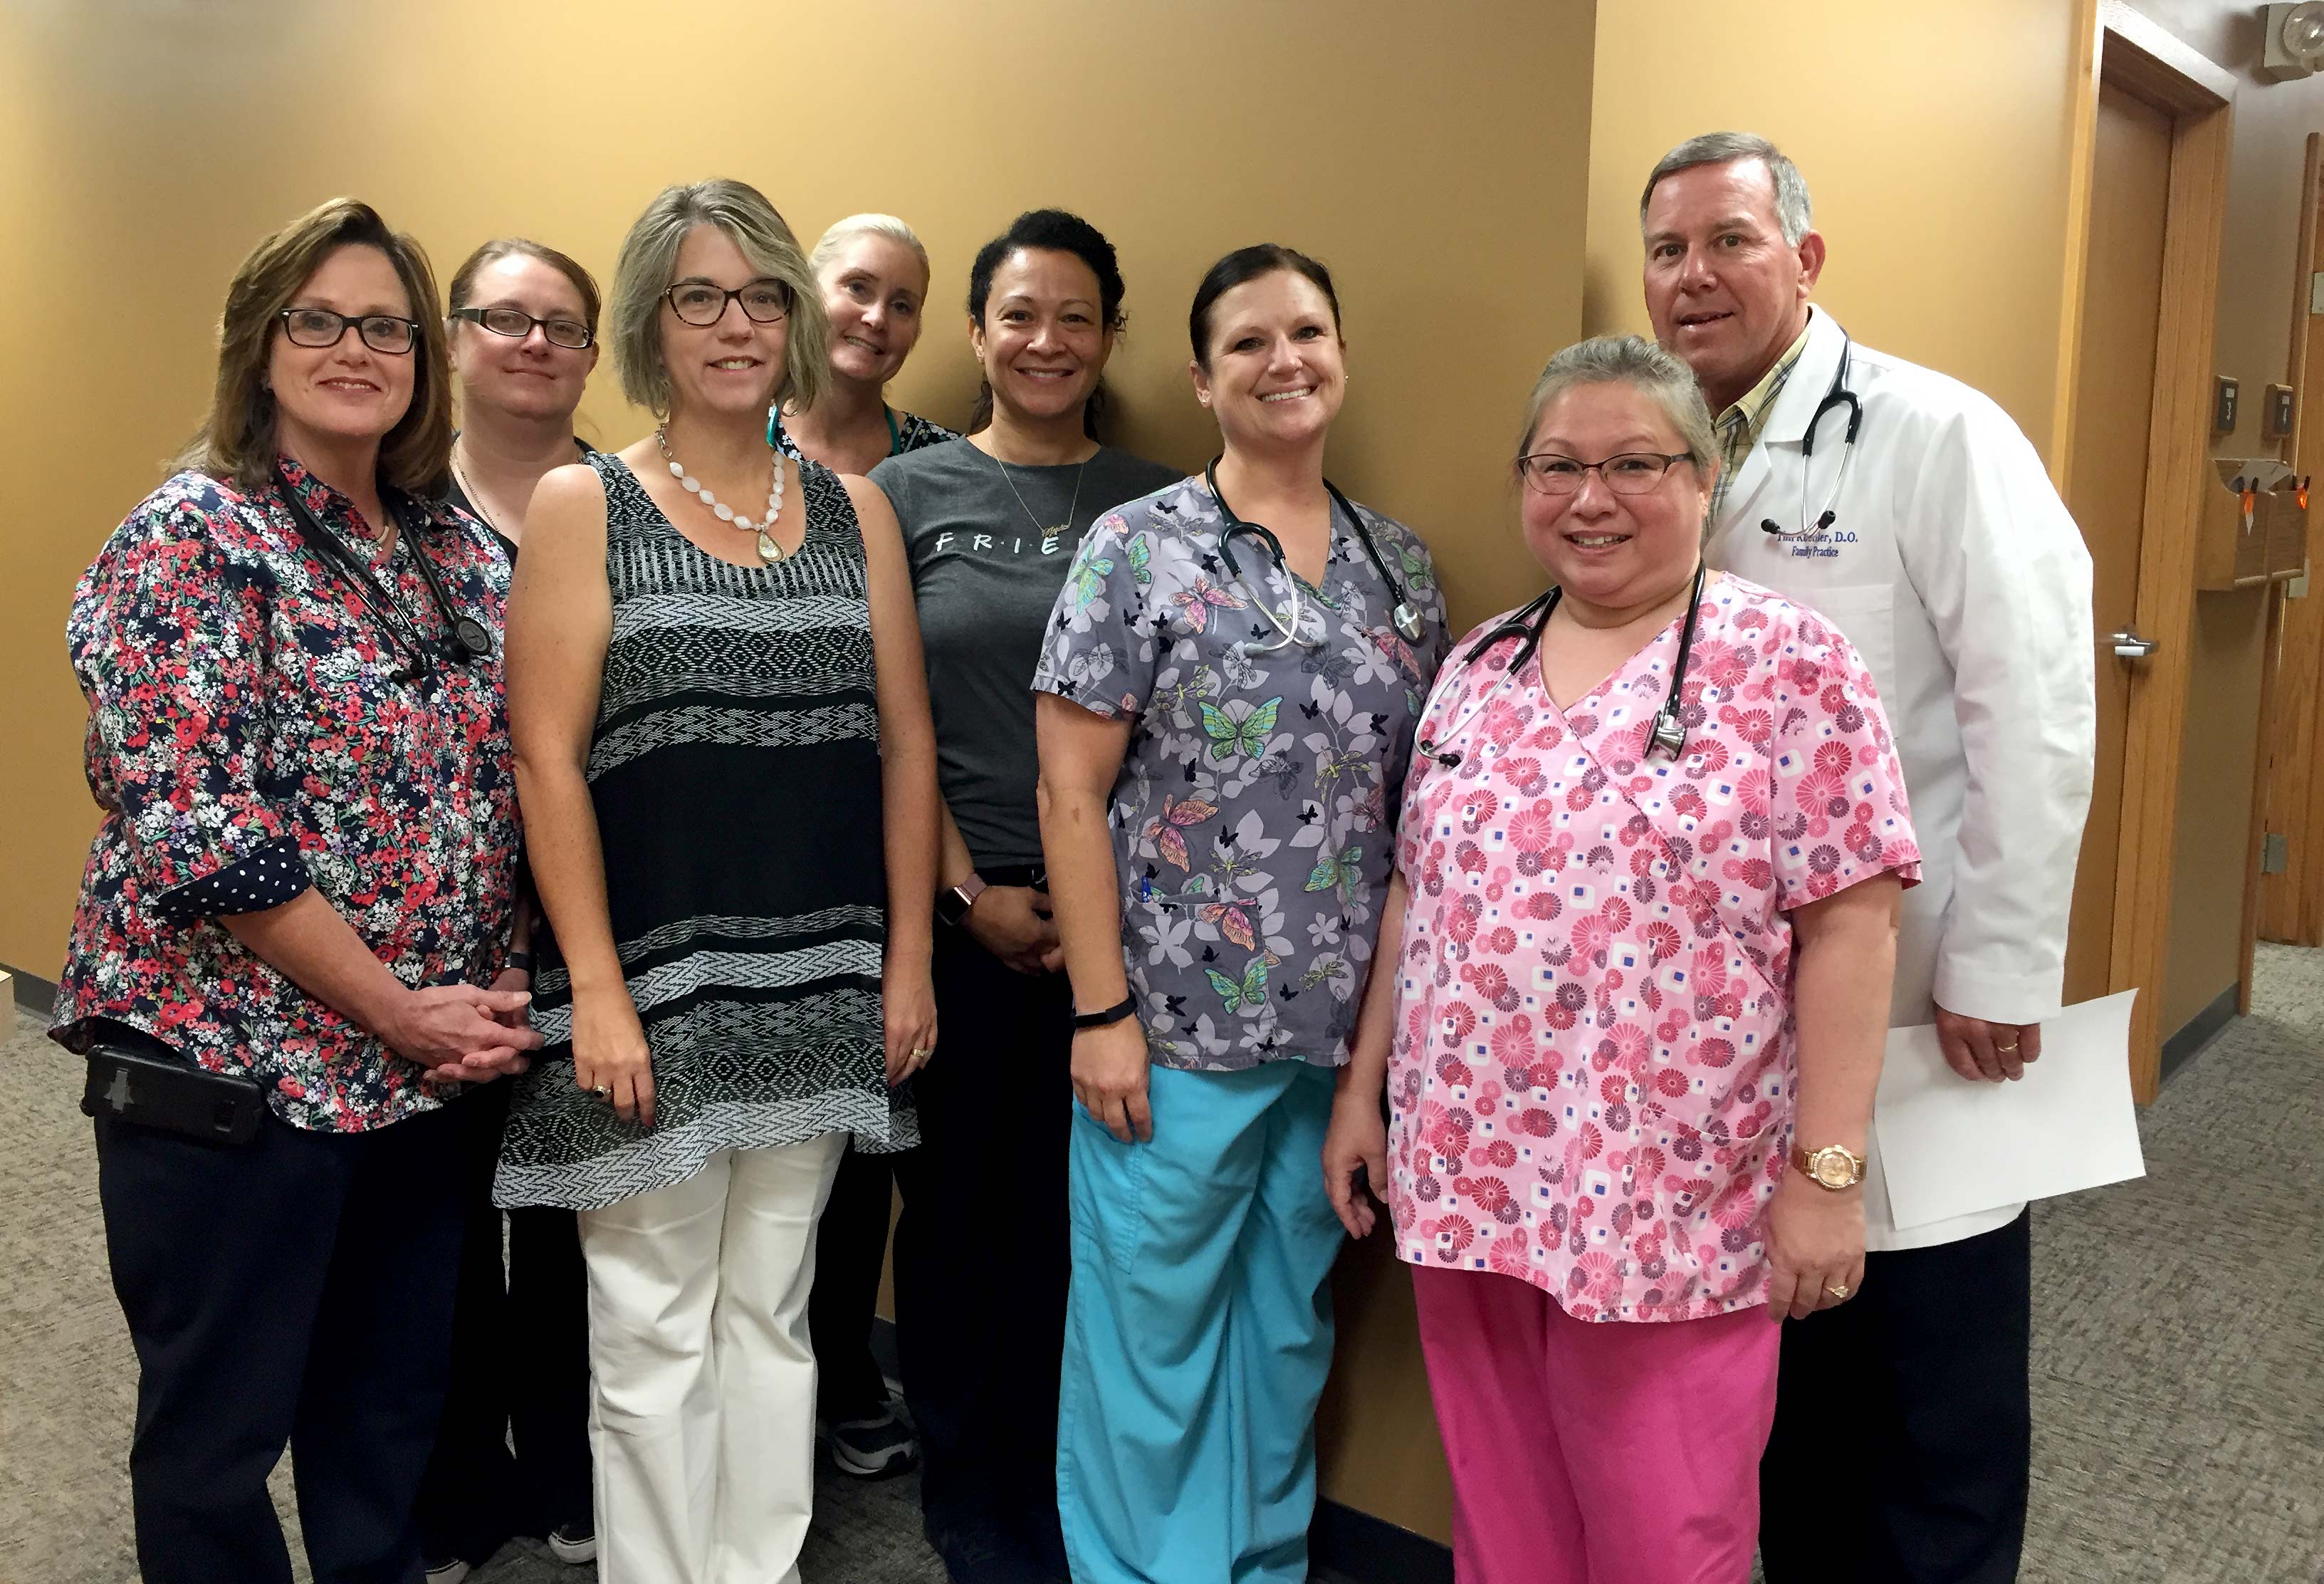 NW Family Physician staff